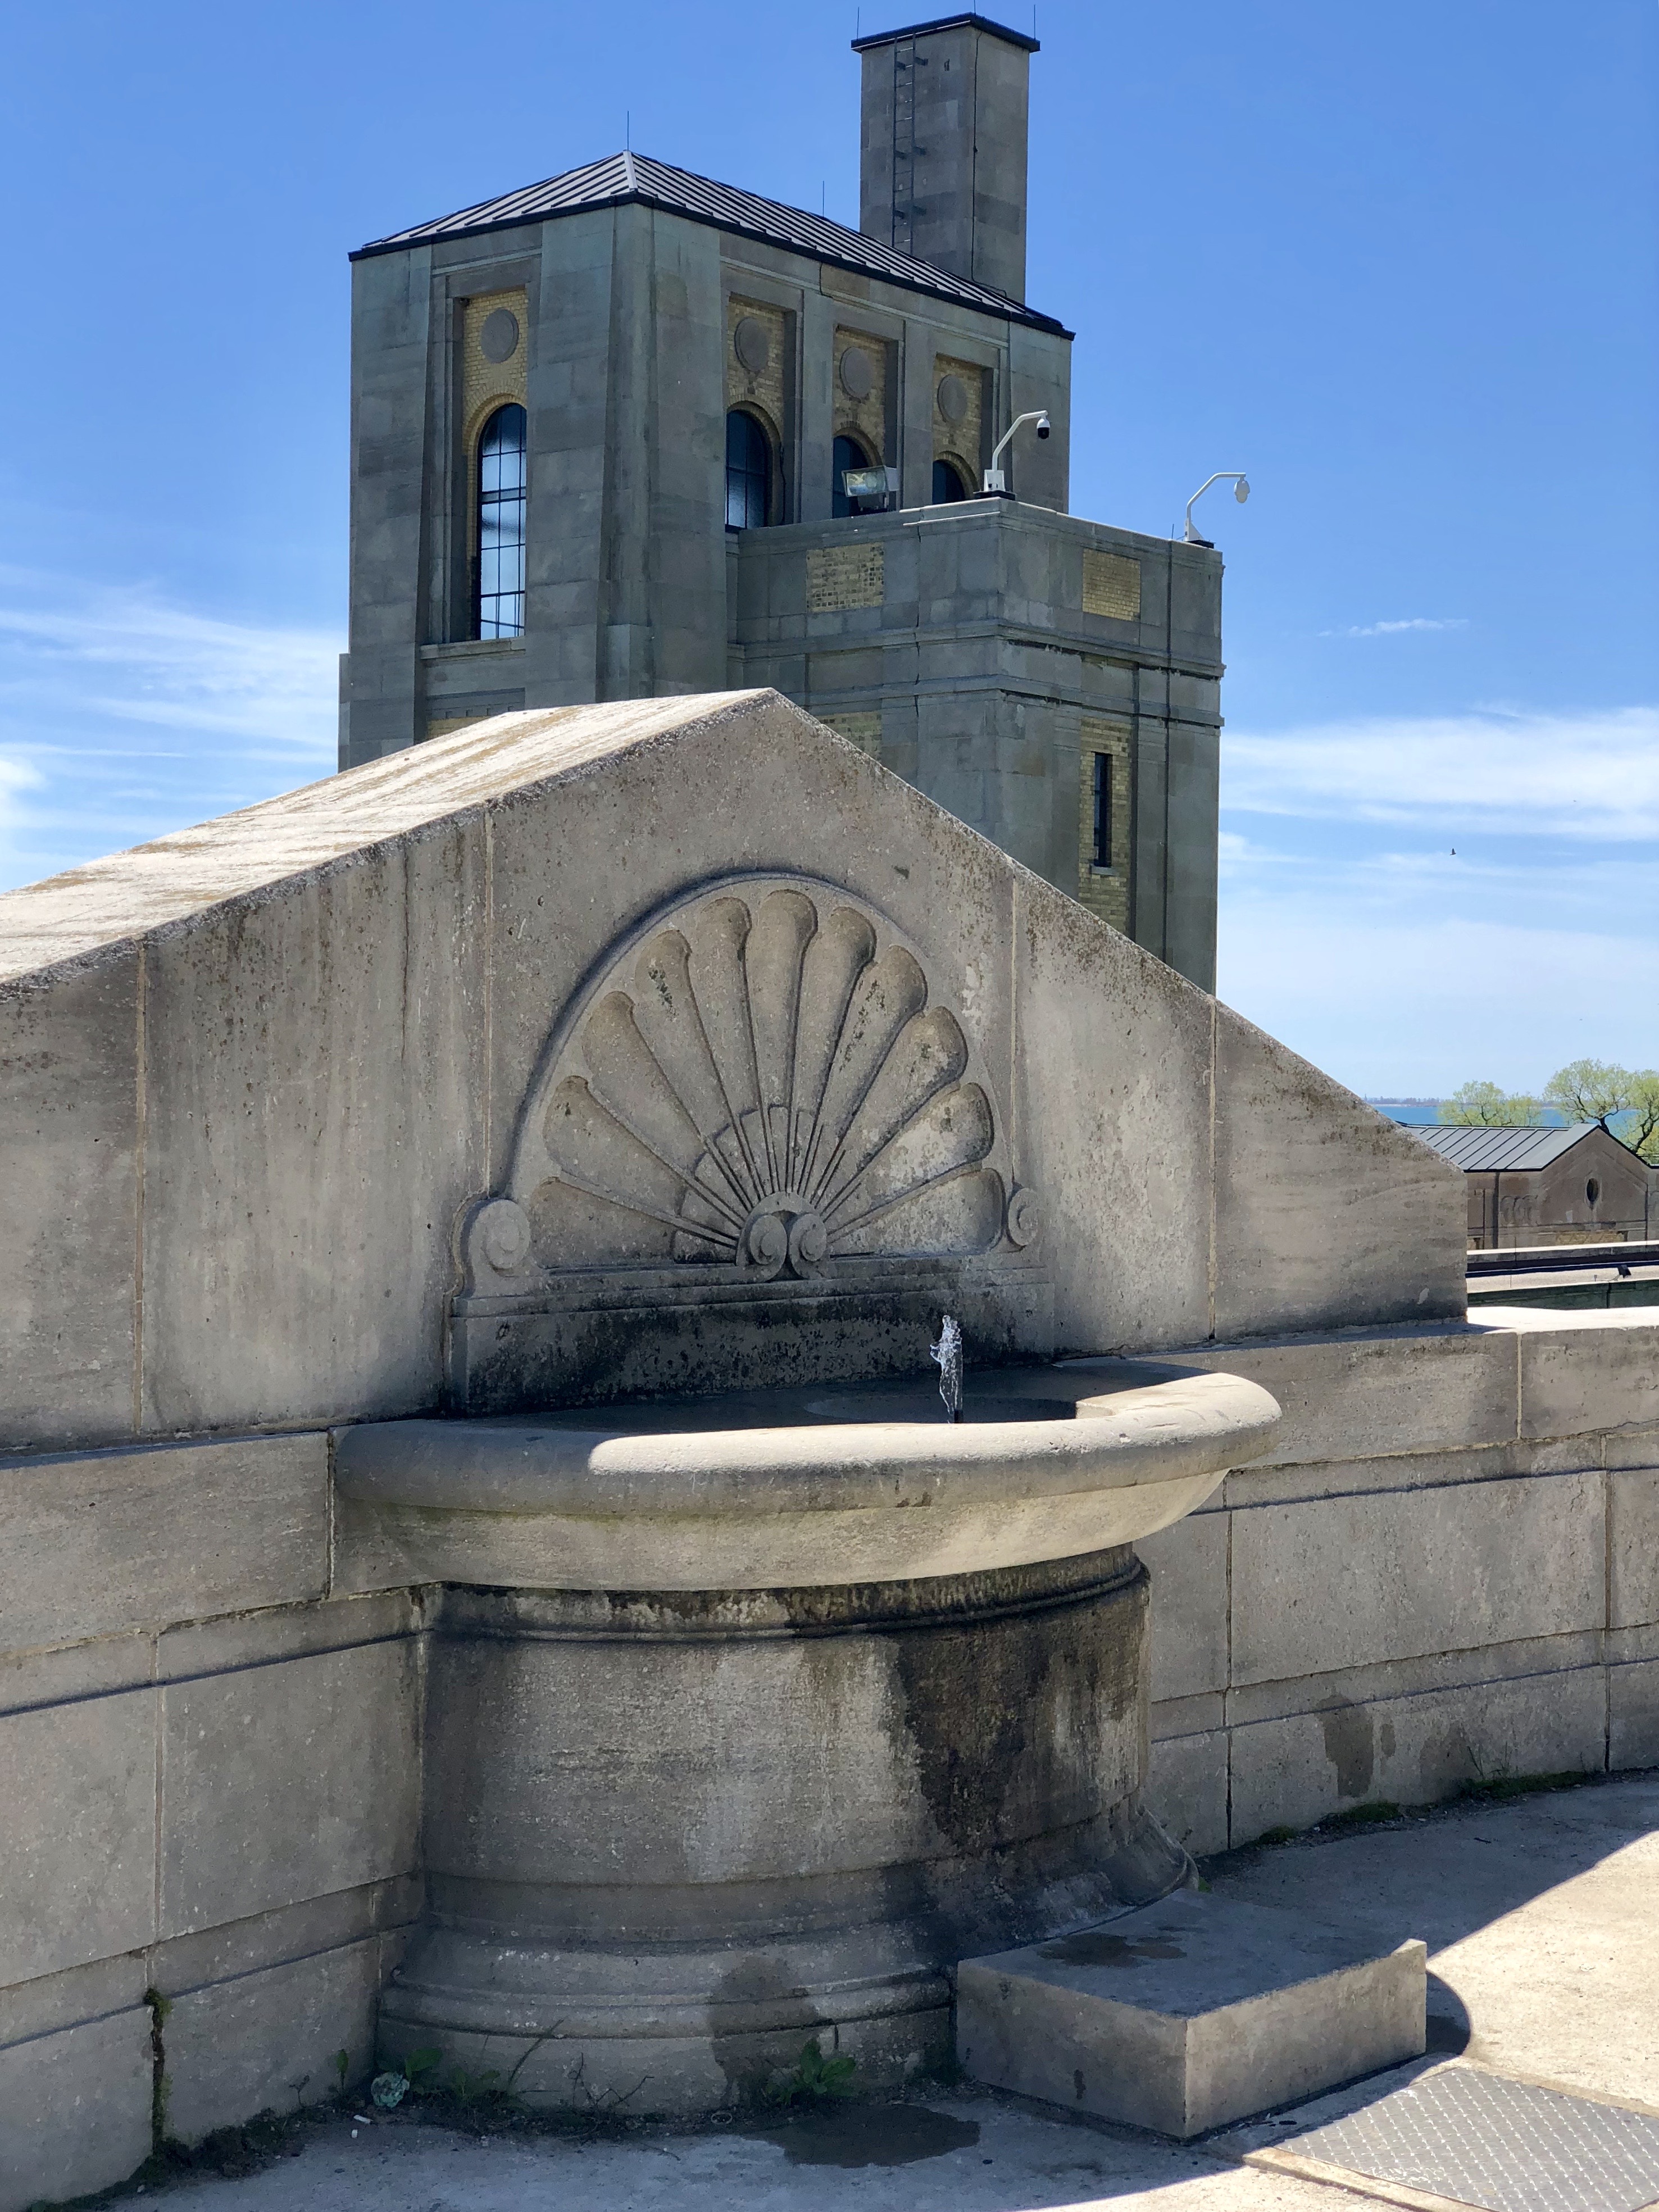 Front fountain of the H.C. Harris water treatment plant of Toronto, under a blue sky